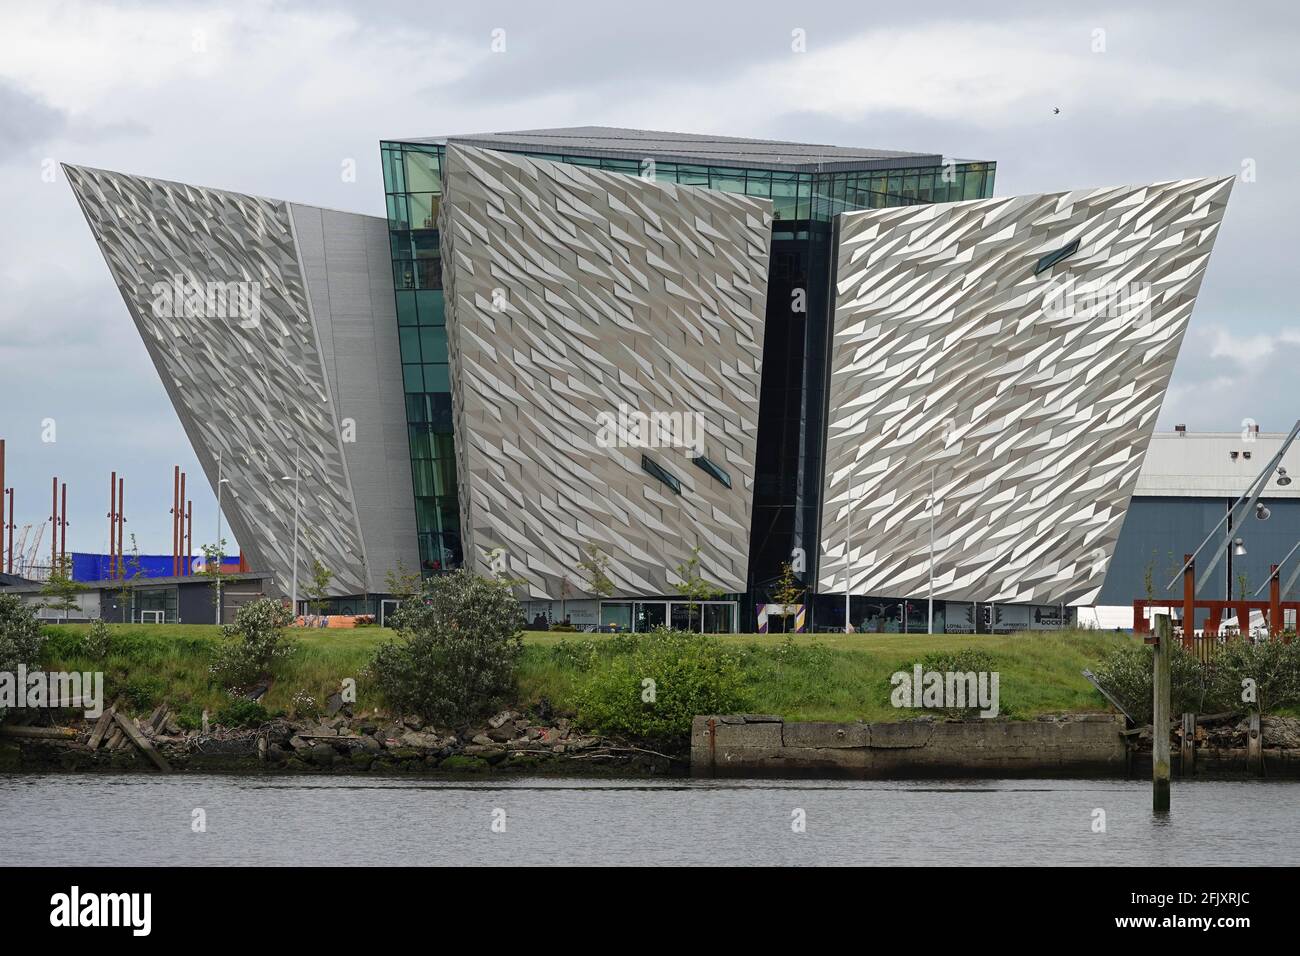 Belfast, Northern Ireland - June 6, 2019: The Titanic Belfast Museum, which opened in 2012 and is shown, where the Titanic ship launched in 1912. Stock Photo